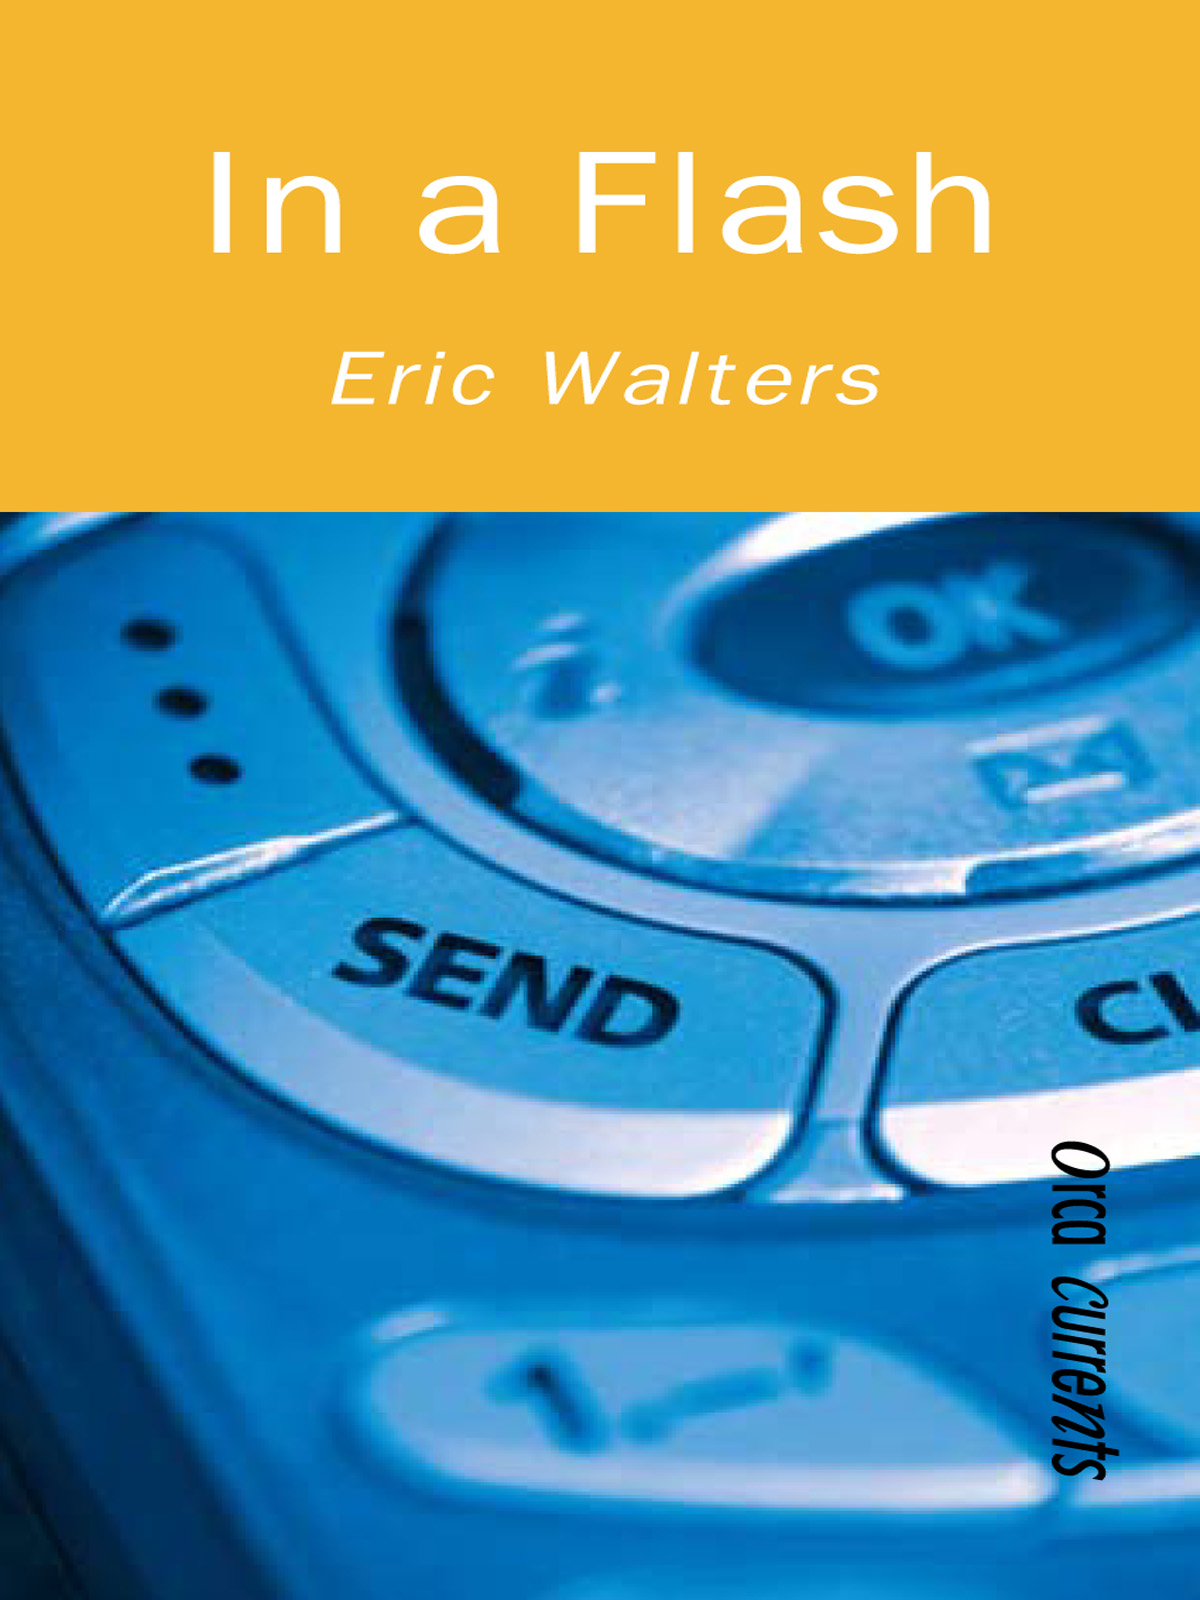 In a Flash (2008) by Eric Walters